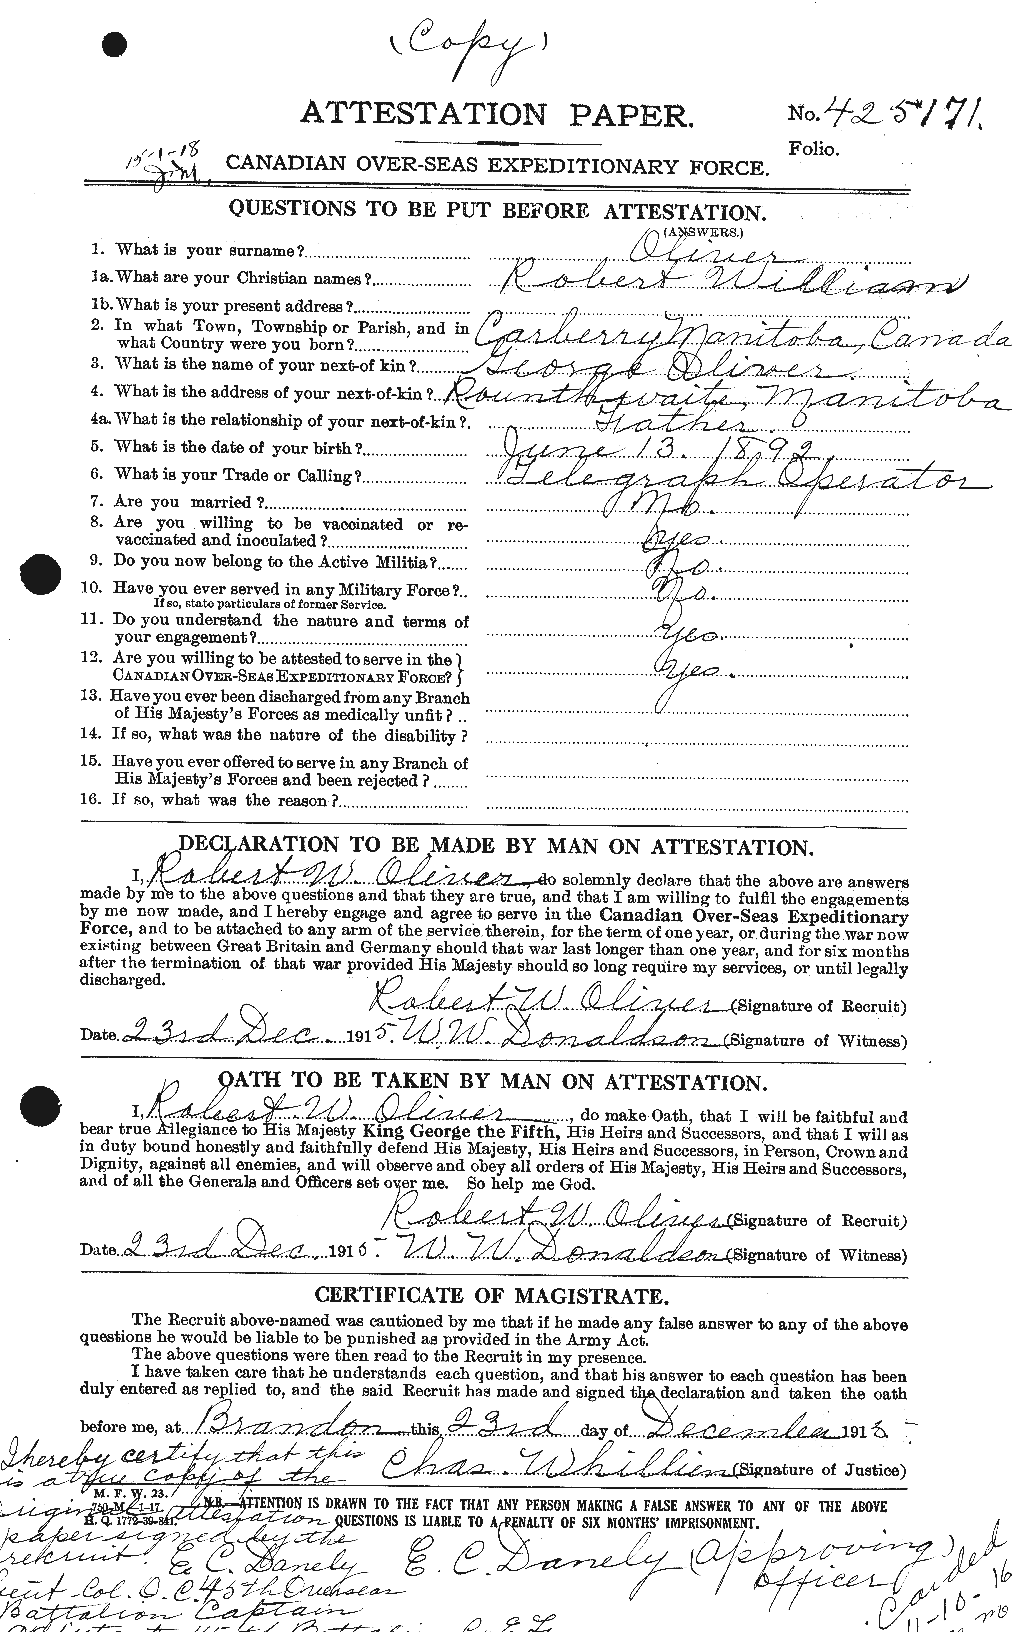 Personnel Records of the First World War - CEF 555492a